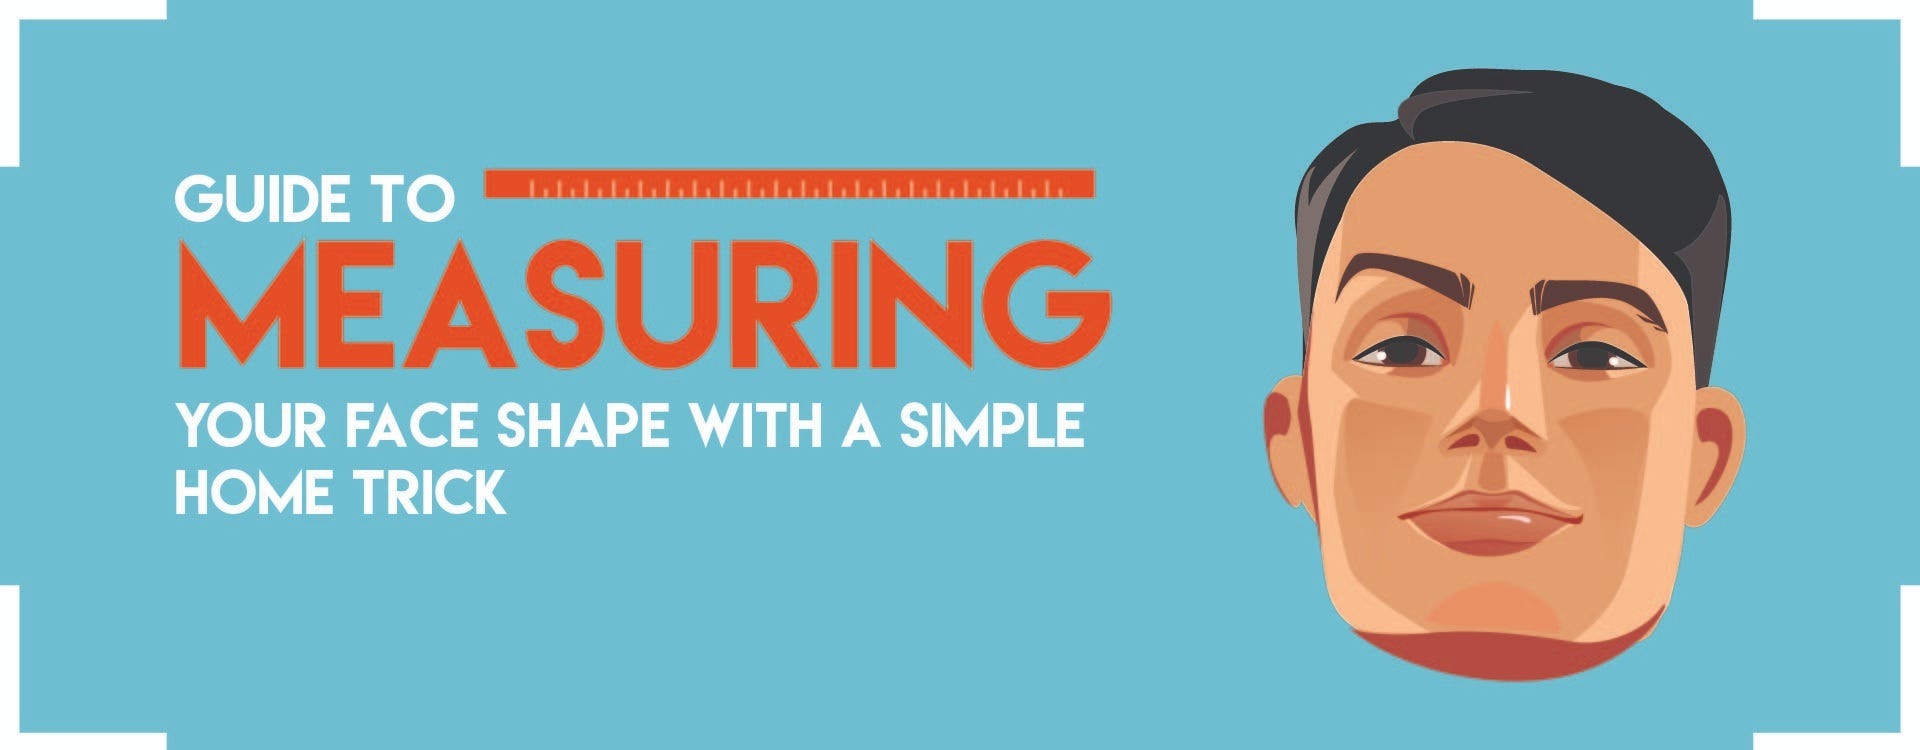 GUIDE TO MEASURING YOUR FACE SHAPE WITH A SIMPLE HOME TRICK